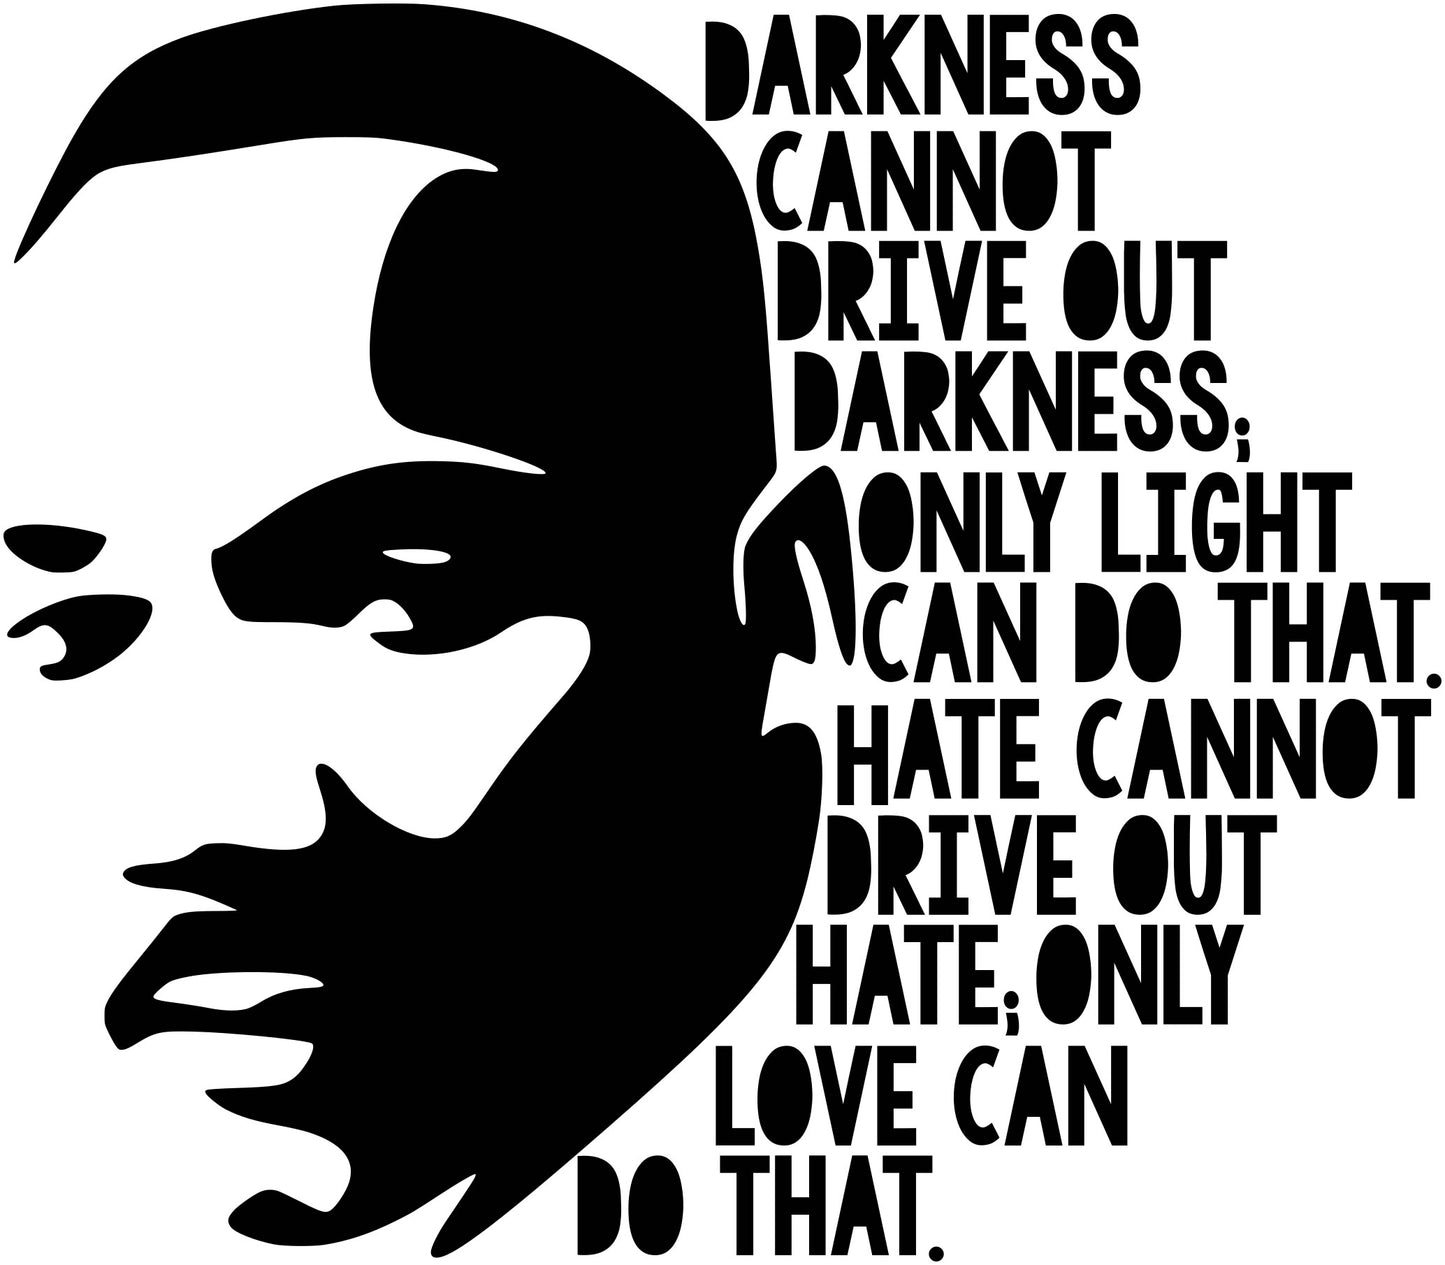 DARKNESS CANNOT DRIVE OUT DARKNESS. ONLY LIGHT CAN DO THAT. HATE CANNOT DRIVE OUT HATE. ONLY LOVE CAN DO THAT. MLK - A